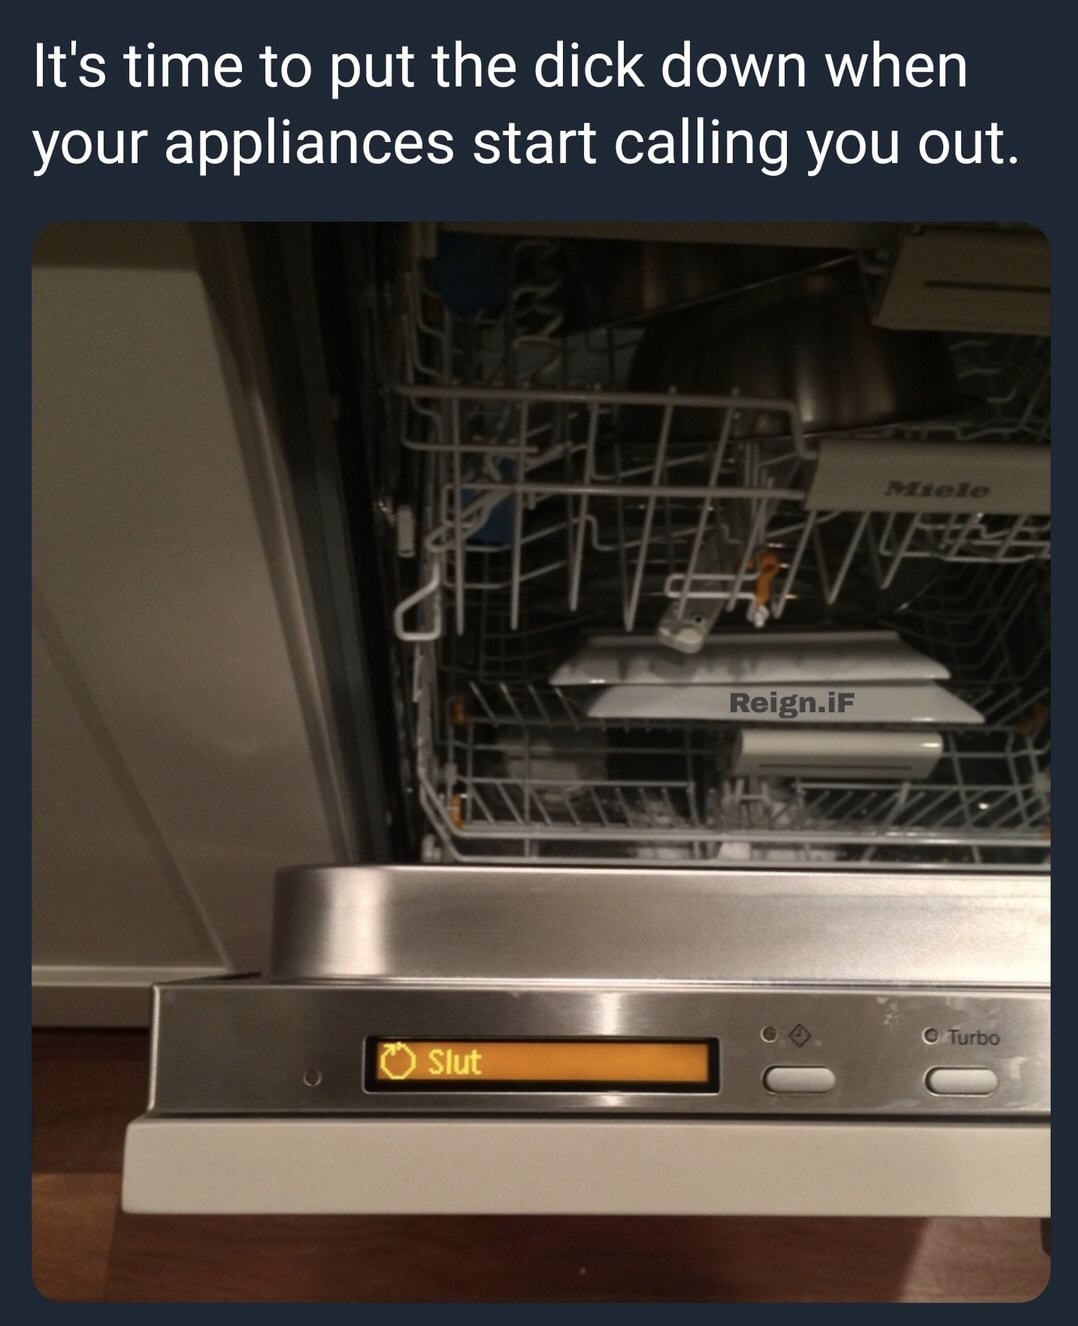 memes - dishwasher slut - It's time to put the dick down when your appliances start calling you out. Miele Reign.iF O Turbo Slut